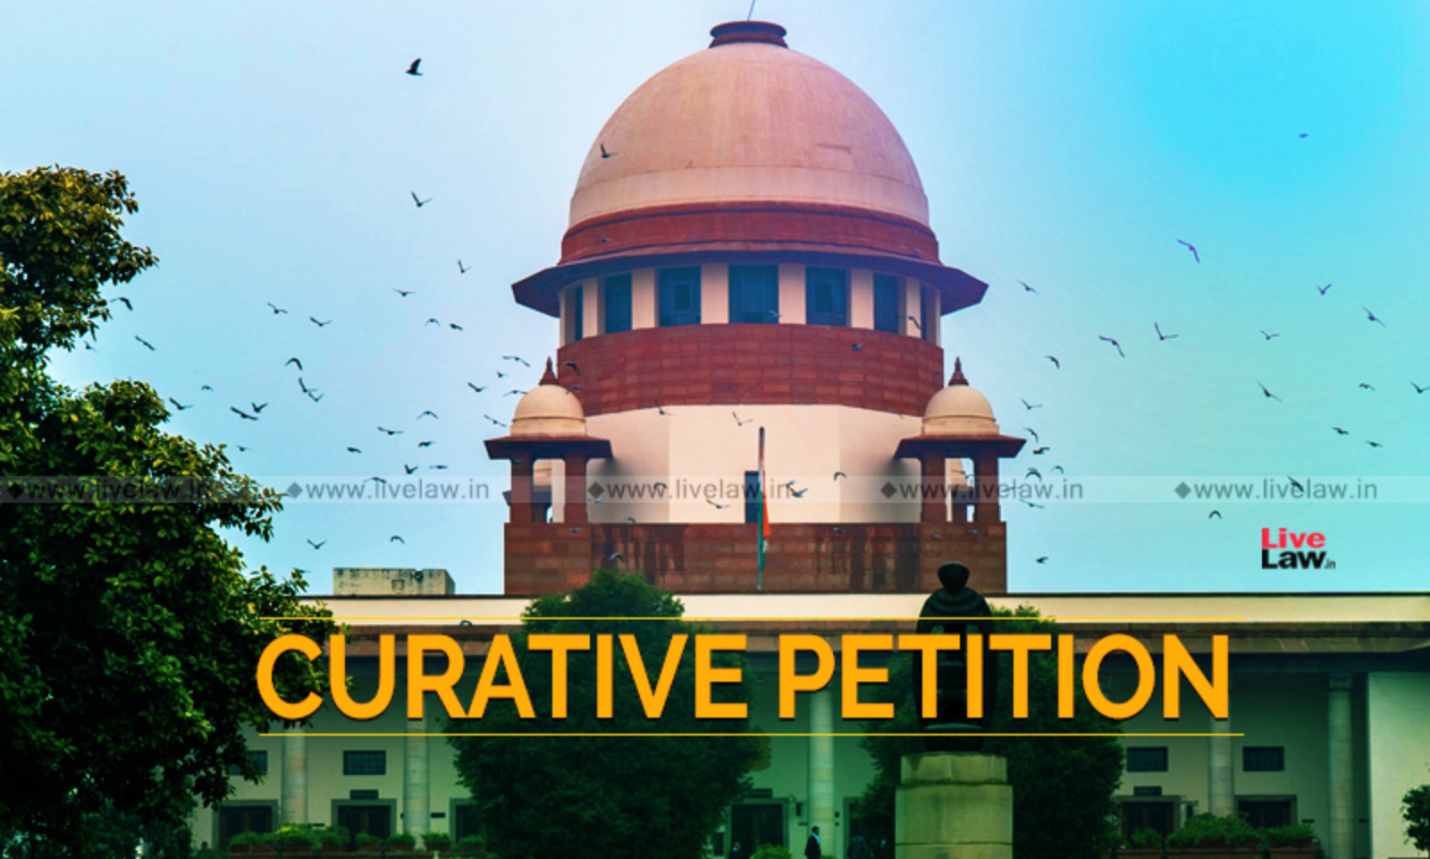 CURATIVE PETITION